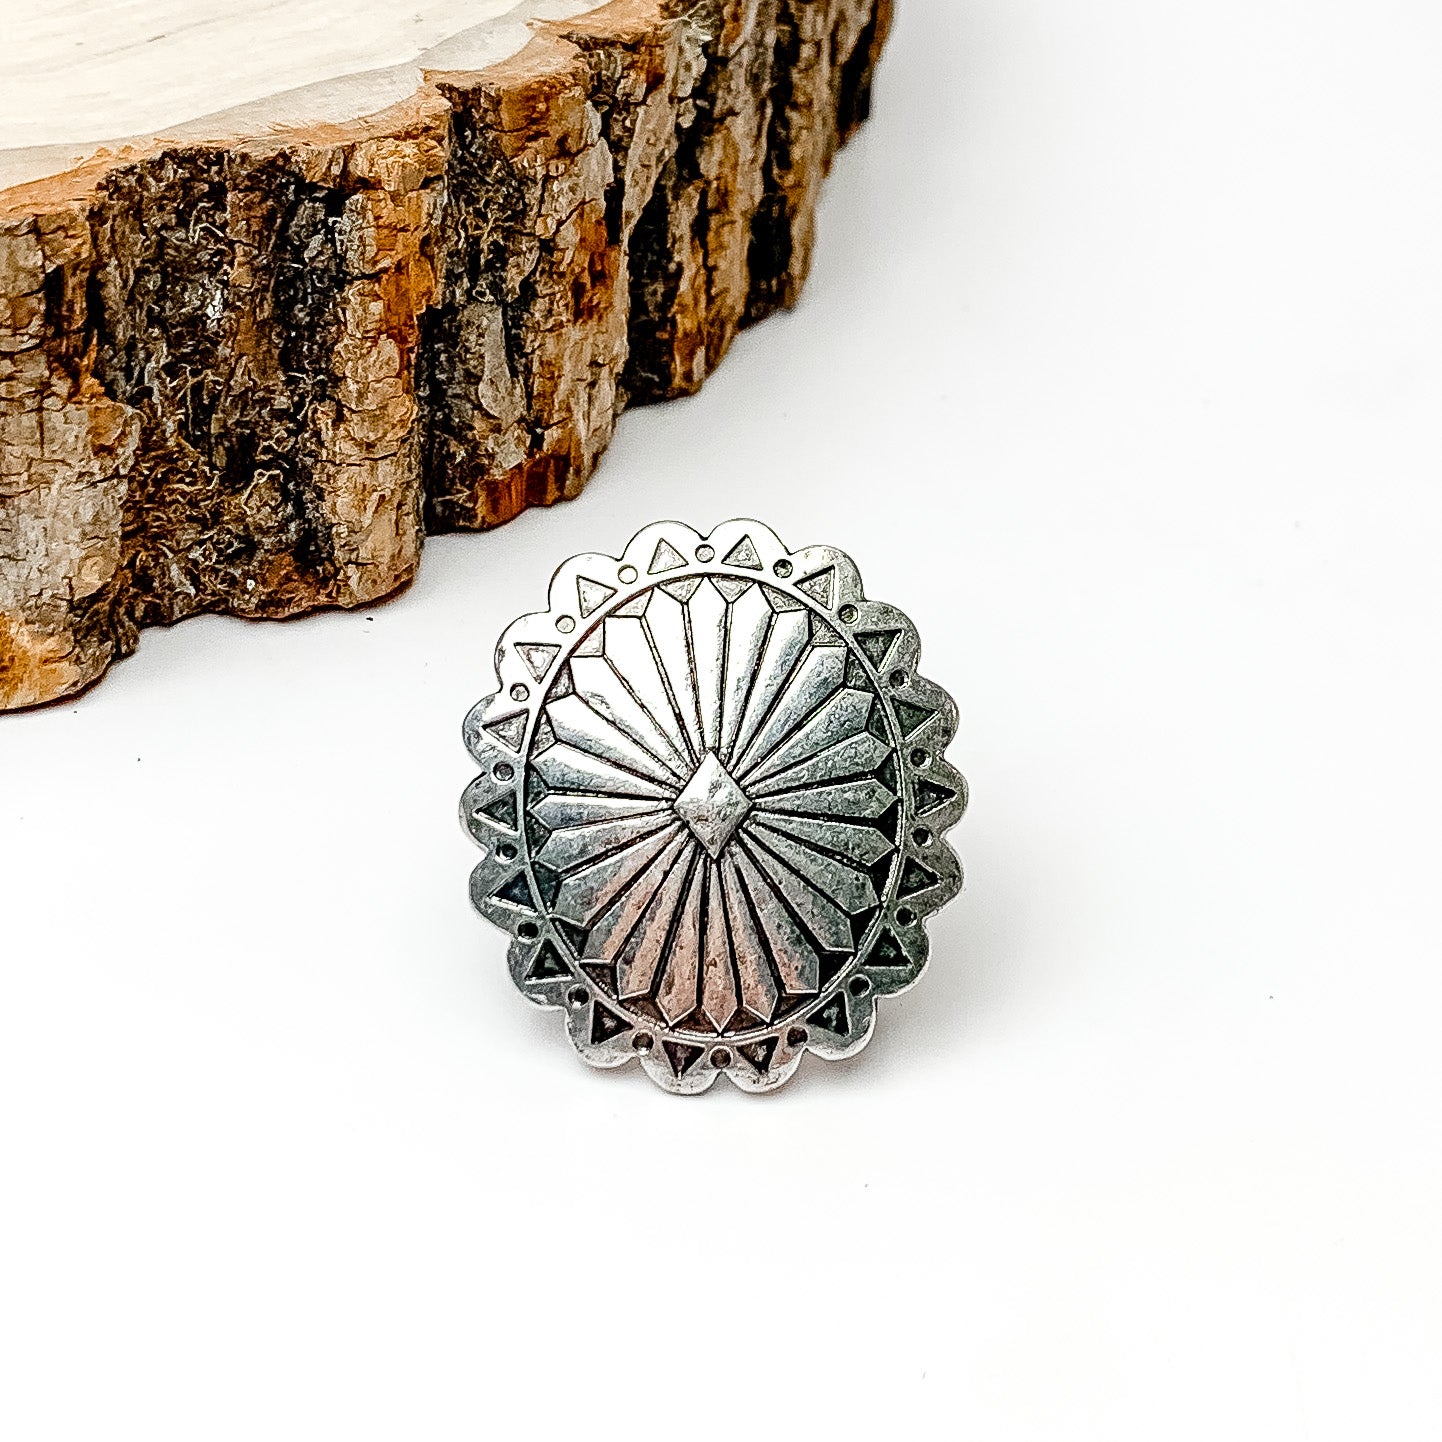 Pictured is a silver concho scarf ring. This scarf ring is pictured on a white background with a piece of wood in the top left corner. 